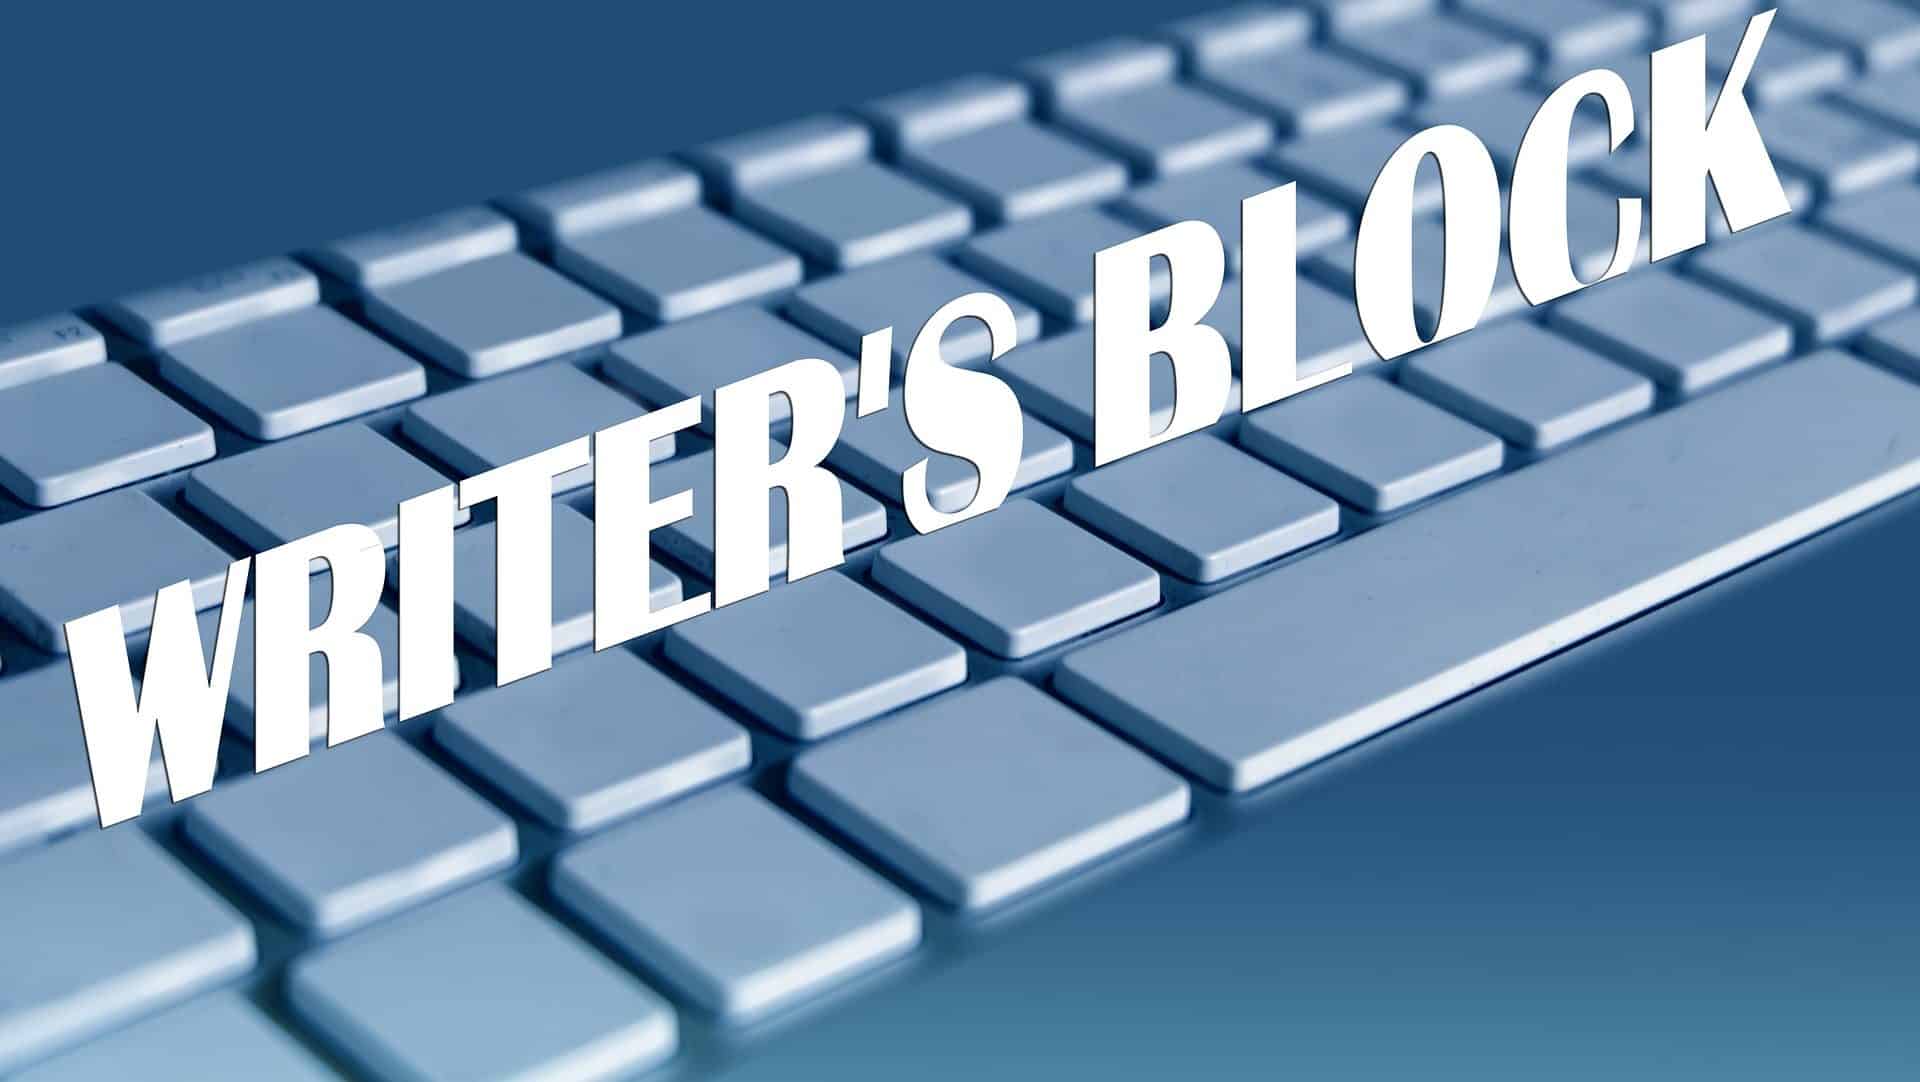 The Marketer’s Approach To Overcoming The Content Writer’s Block